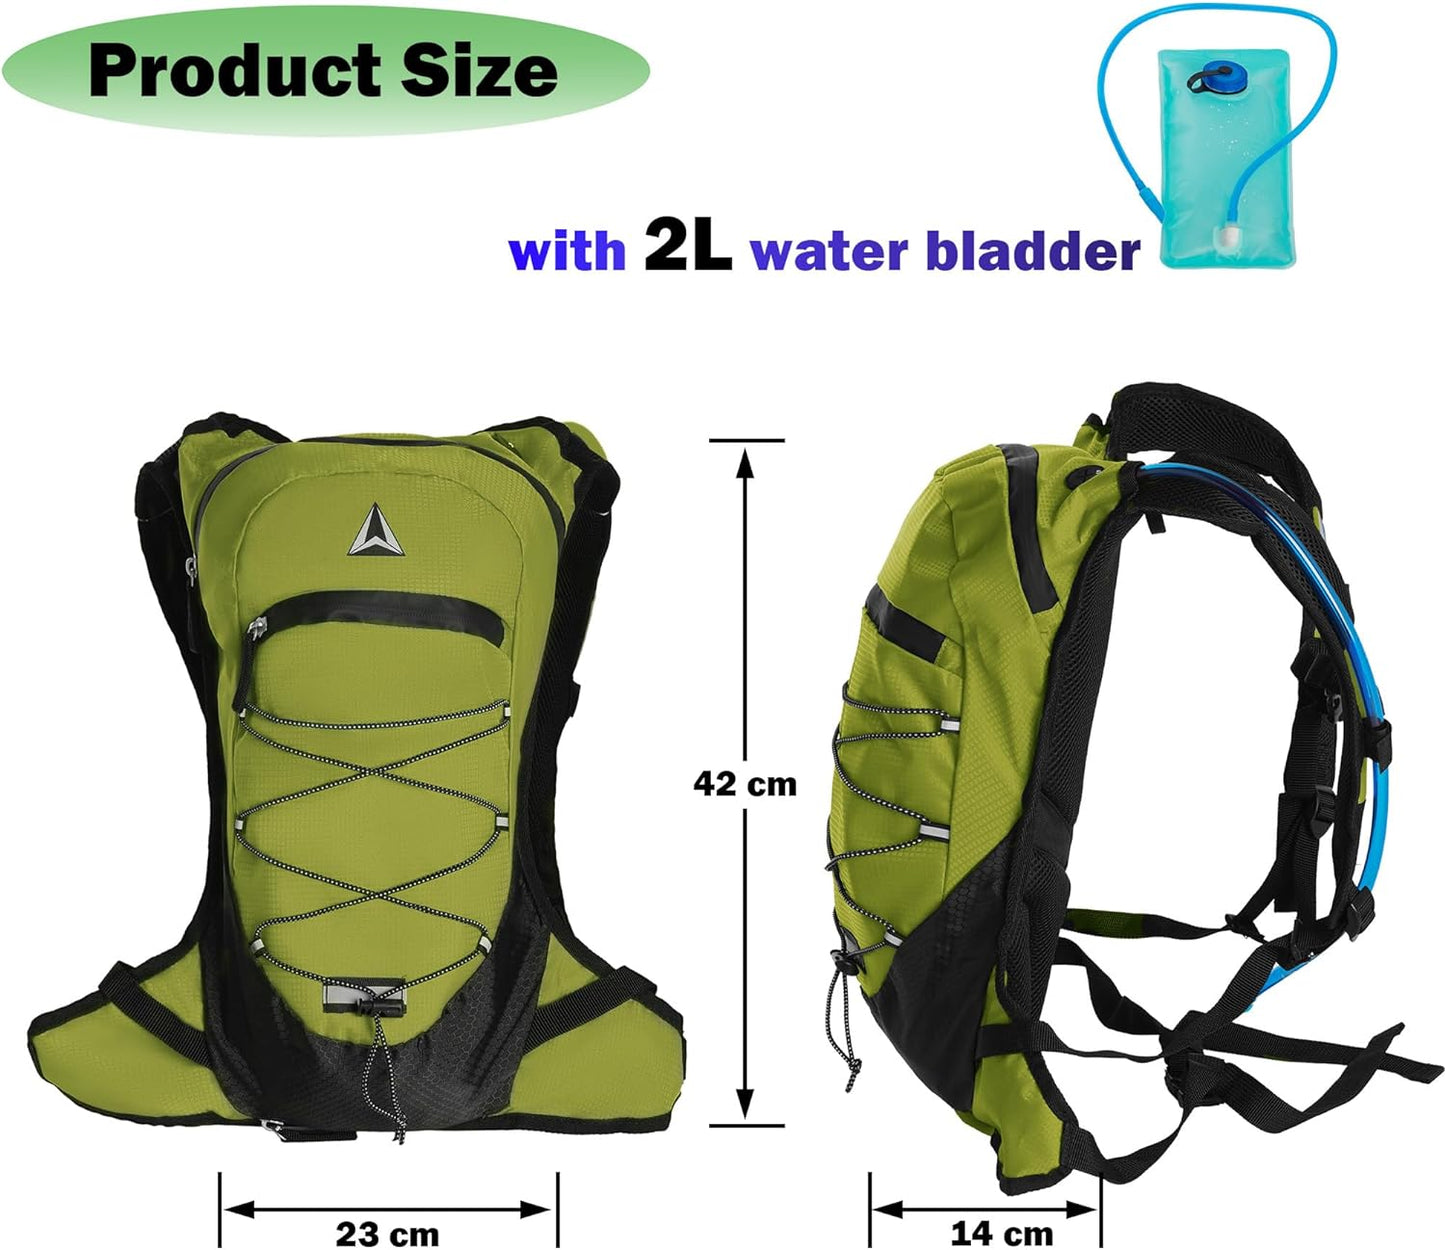 Cango Hydration Backpack with 2L Water Bladder, High Flow Bite Valve, Lightweight Cycling Backpack, Insulated Hydration Running/Hiking Backpack with Storage (FALL COLLECTION)